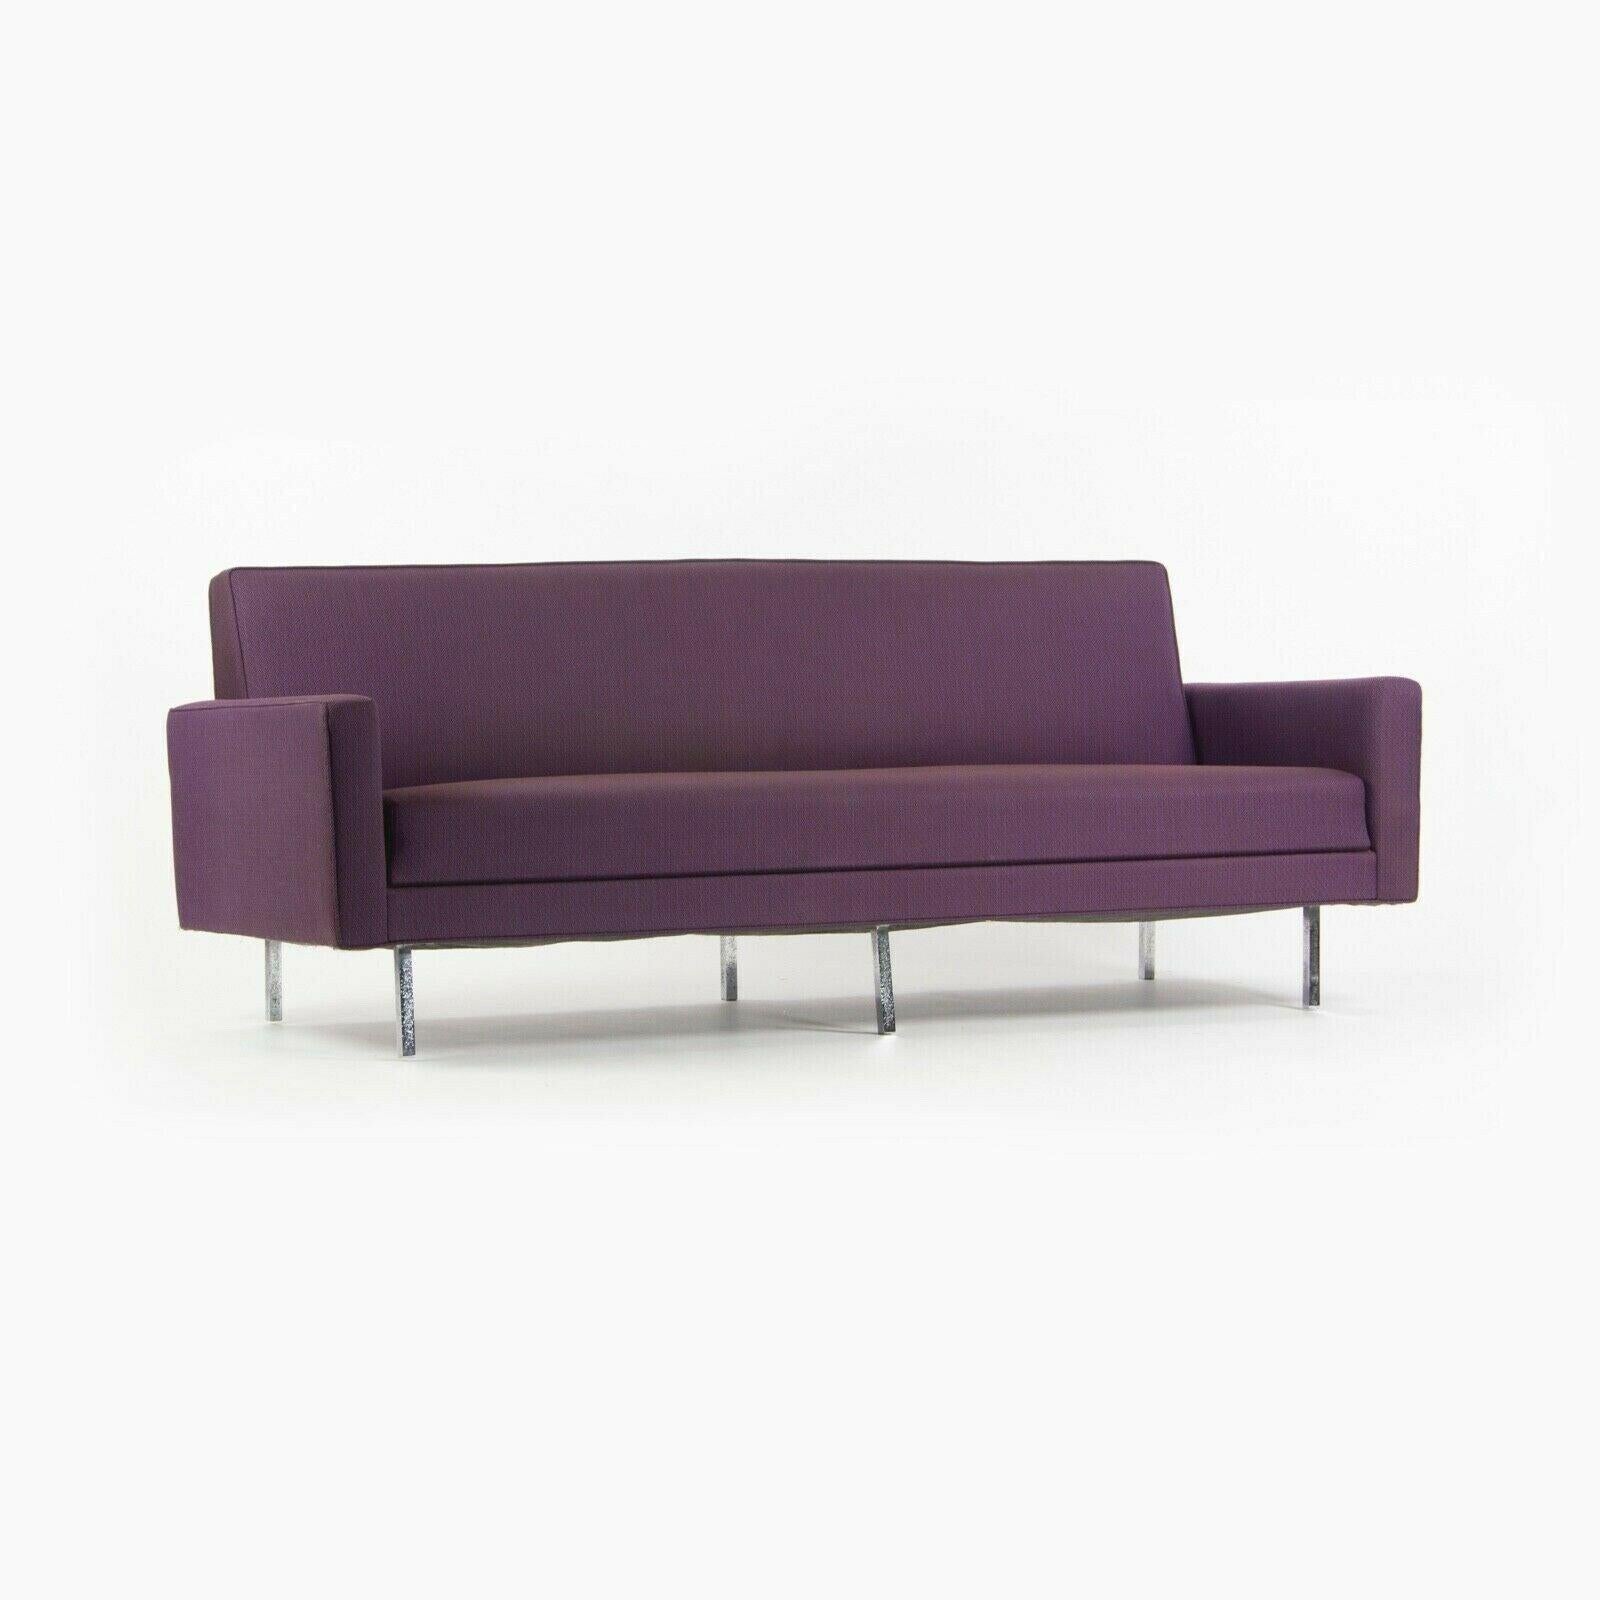 Listed for sale is an original Florence Knoll three-seater sofa, designed by the renowned Florence Knoll and produced by Knoll Associates. This example was produced during the later 1950's. It was re-done in recent years by East Penn Upholstery, a